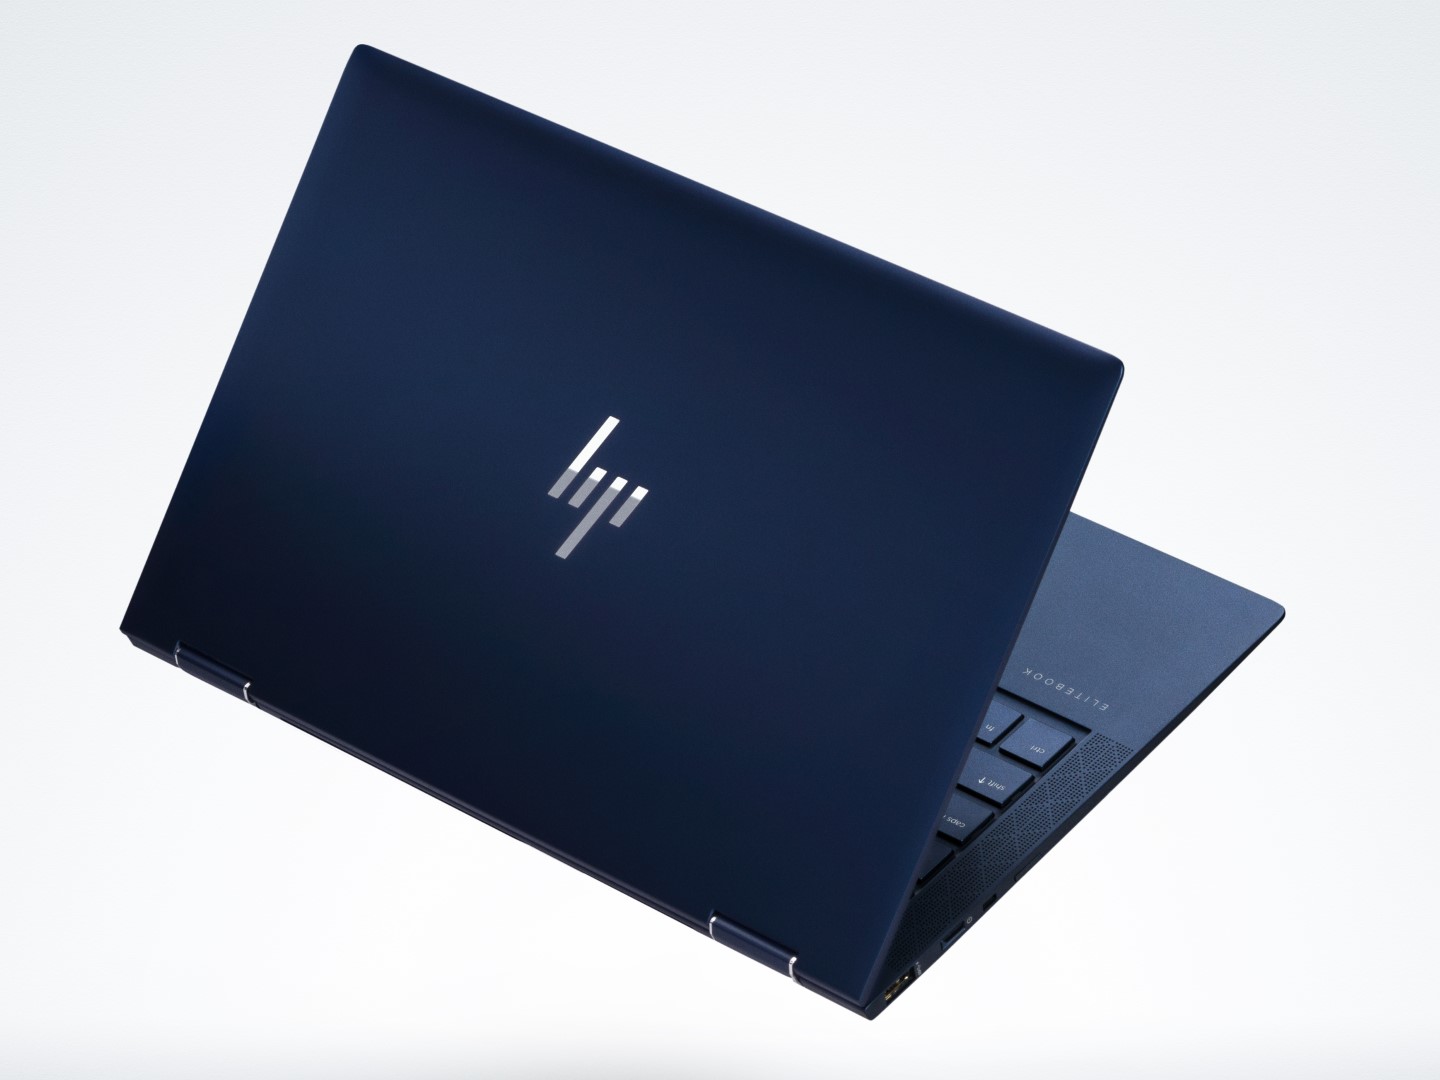 HP Elite Dragonfly is a beautified EliteBook x360 1030, will offer 